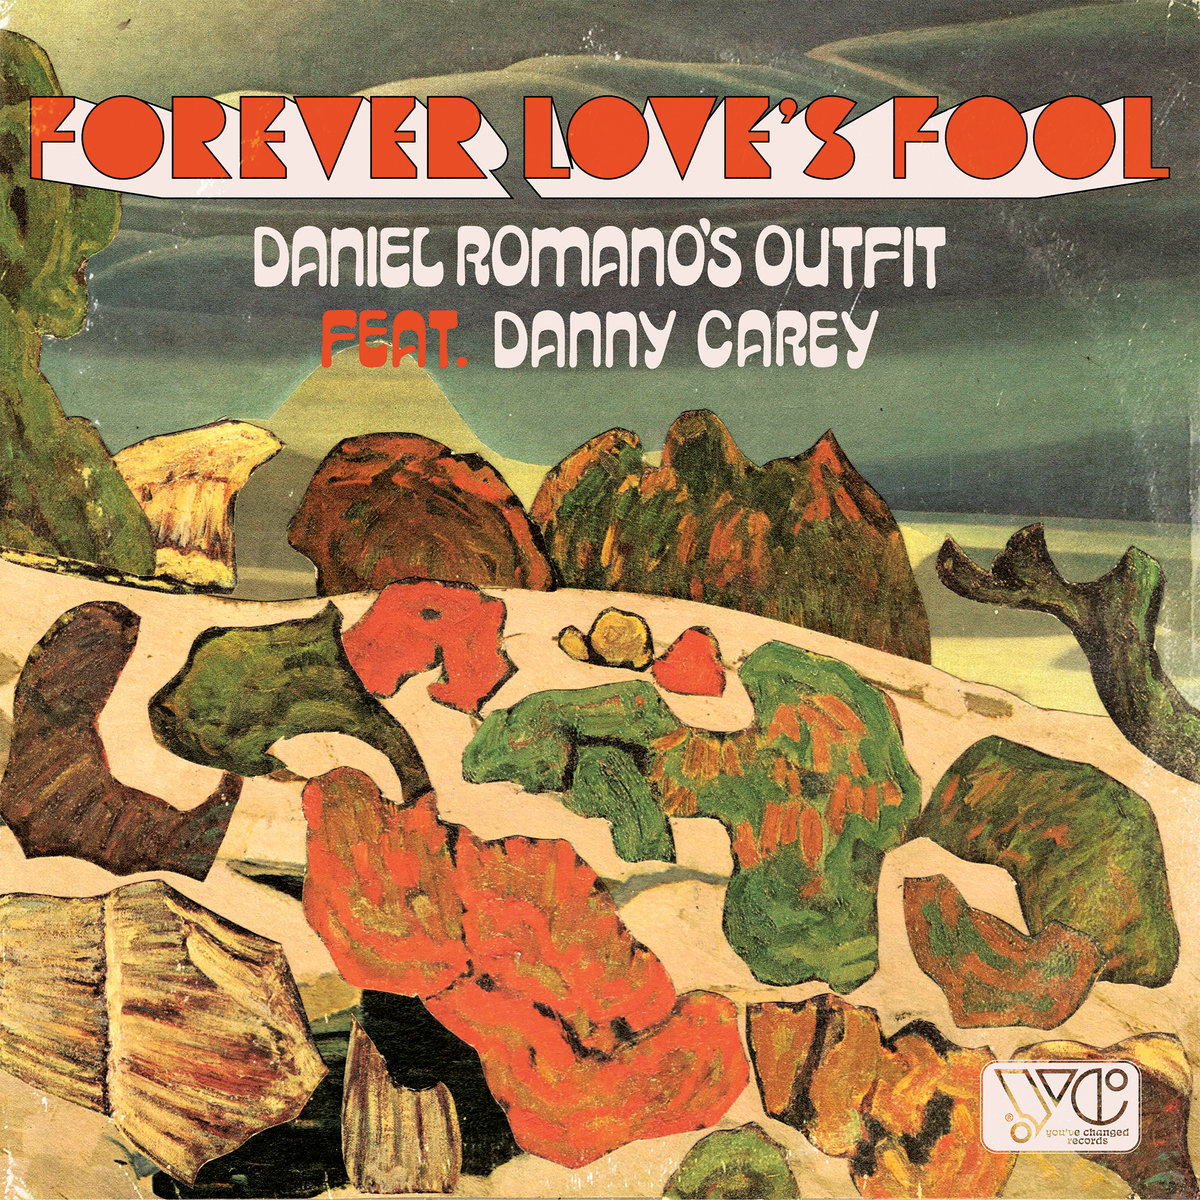 Daniel Romano's Outfit Feat. Danny Carey - 'Forever Love's Fool'